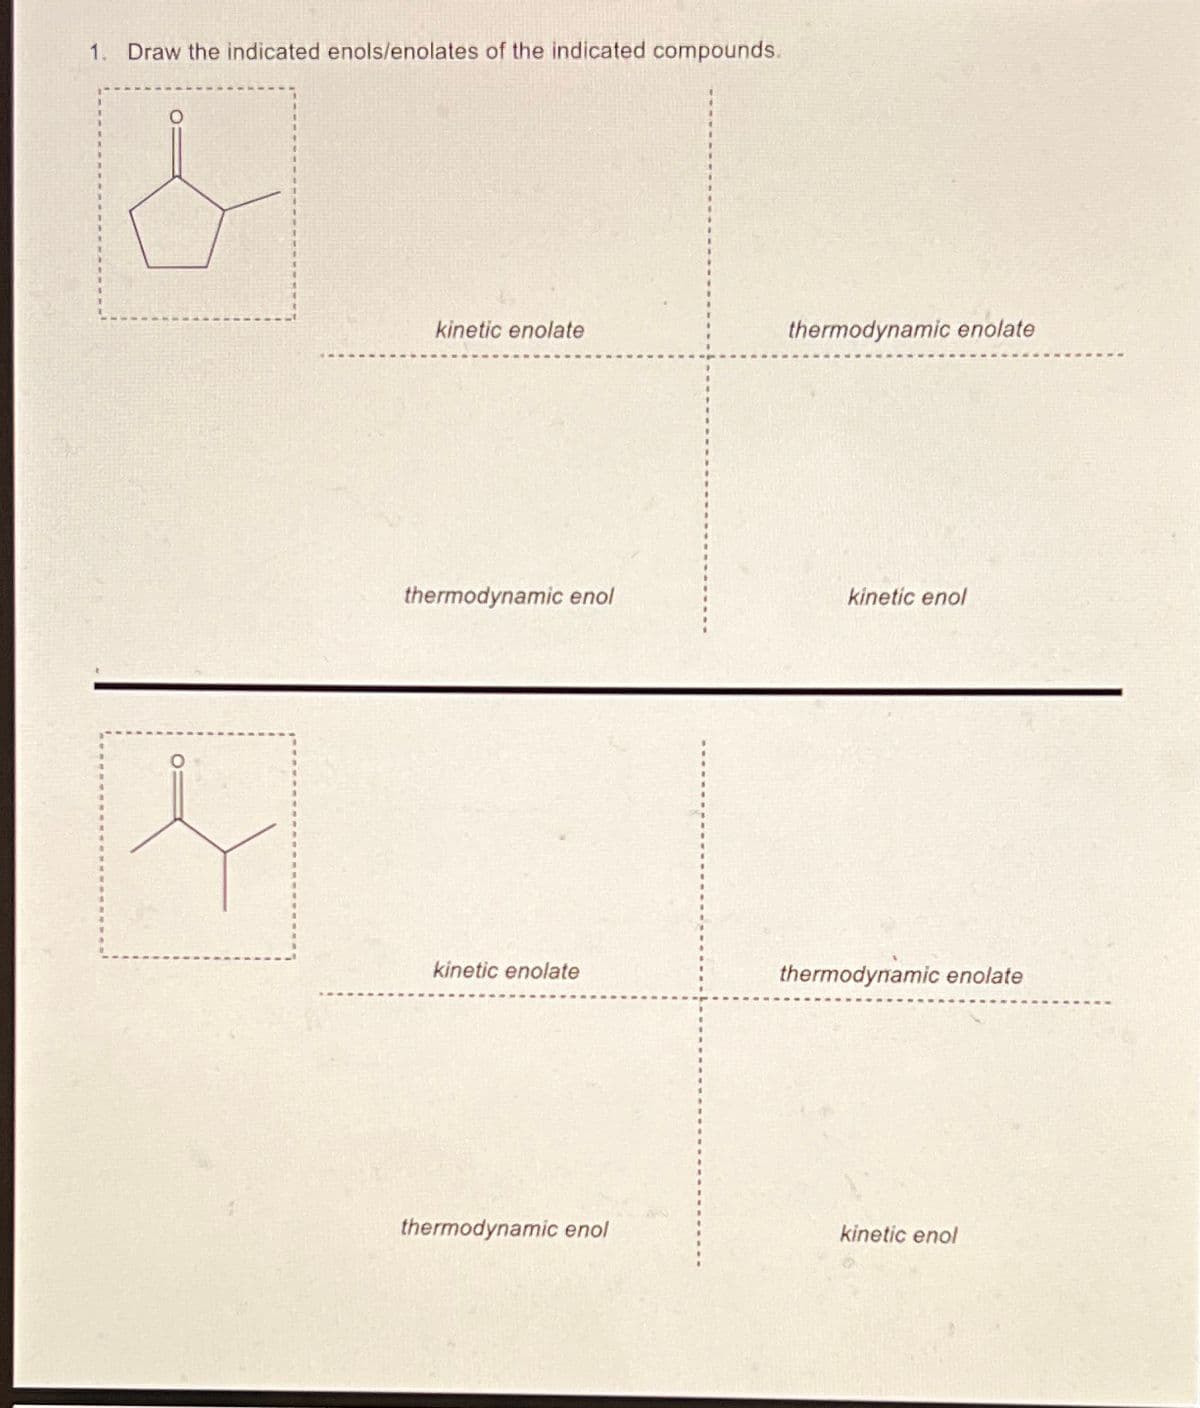 1. Draw the indicated enols/enolates of the indicated compounds.
kinetic enolate
thermodynamic enolate
thermodynamic enol
kinetic enol
kinetic enolate
thermodynamic enolate
thermodynamic enol
kinetic enol